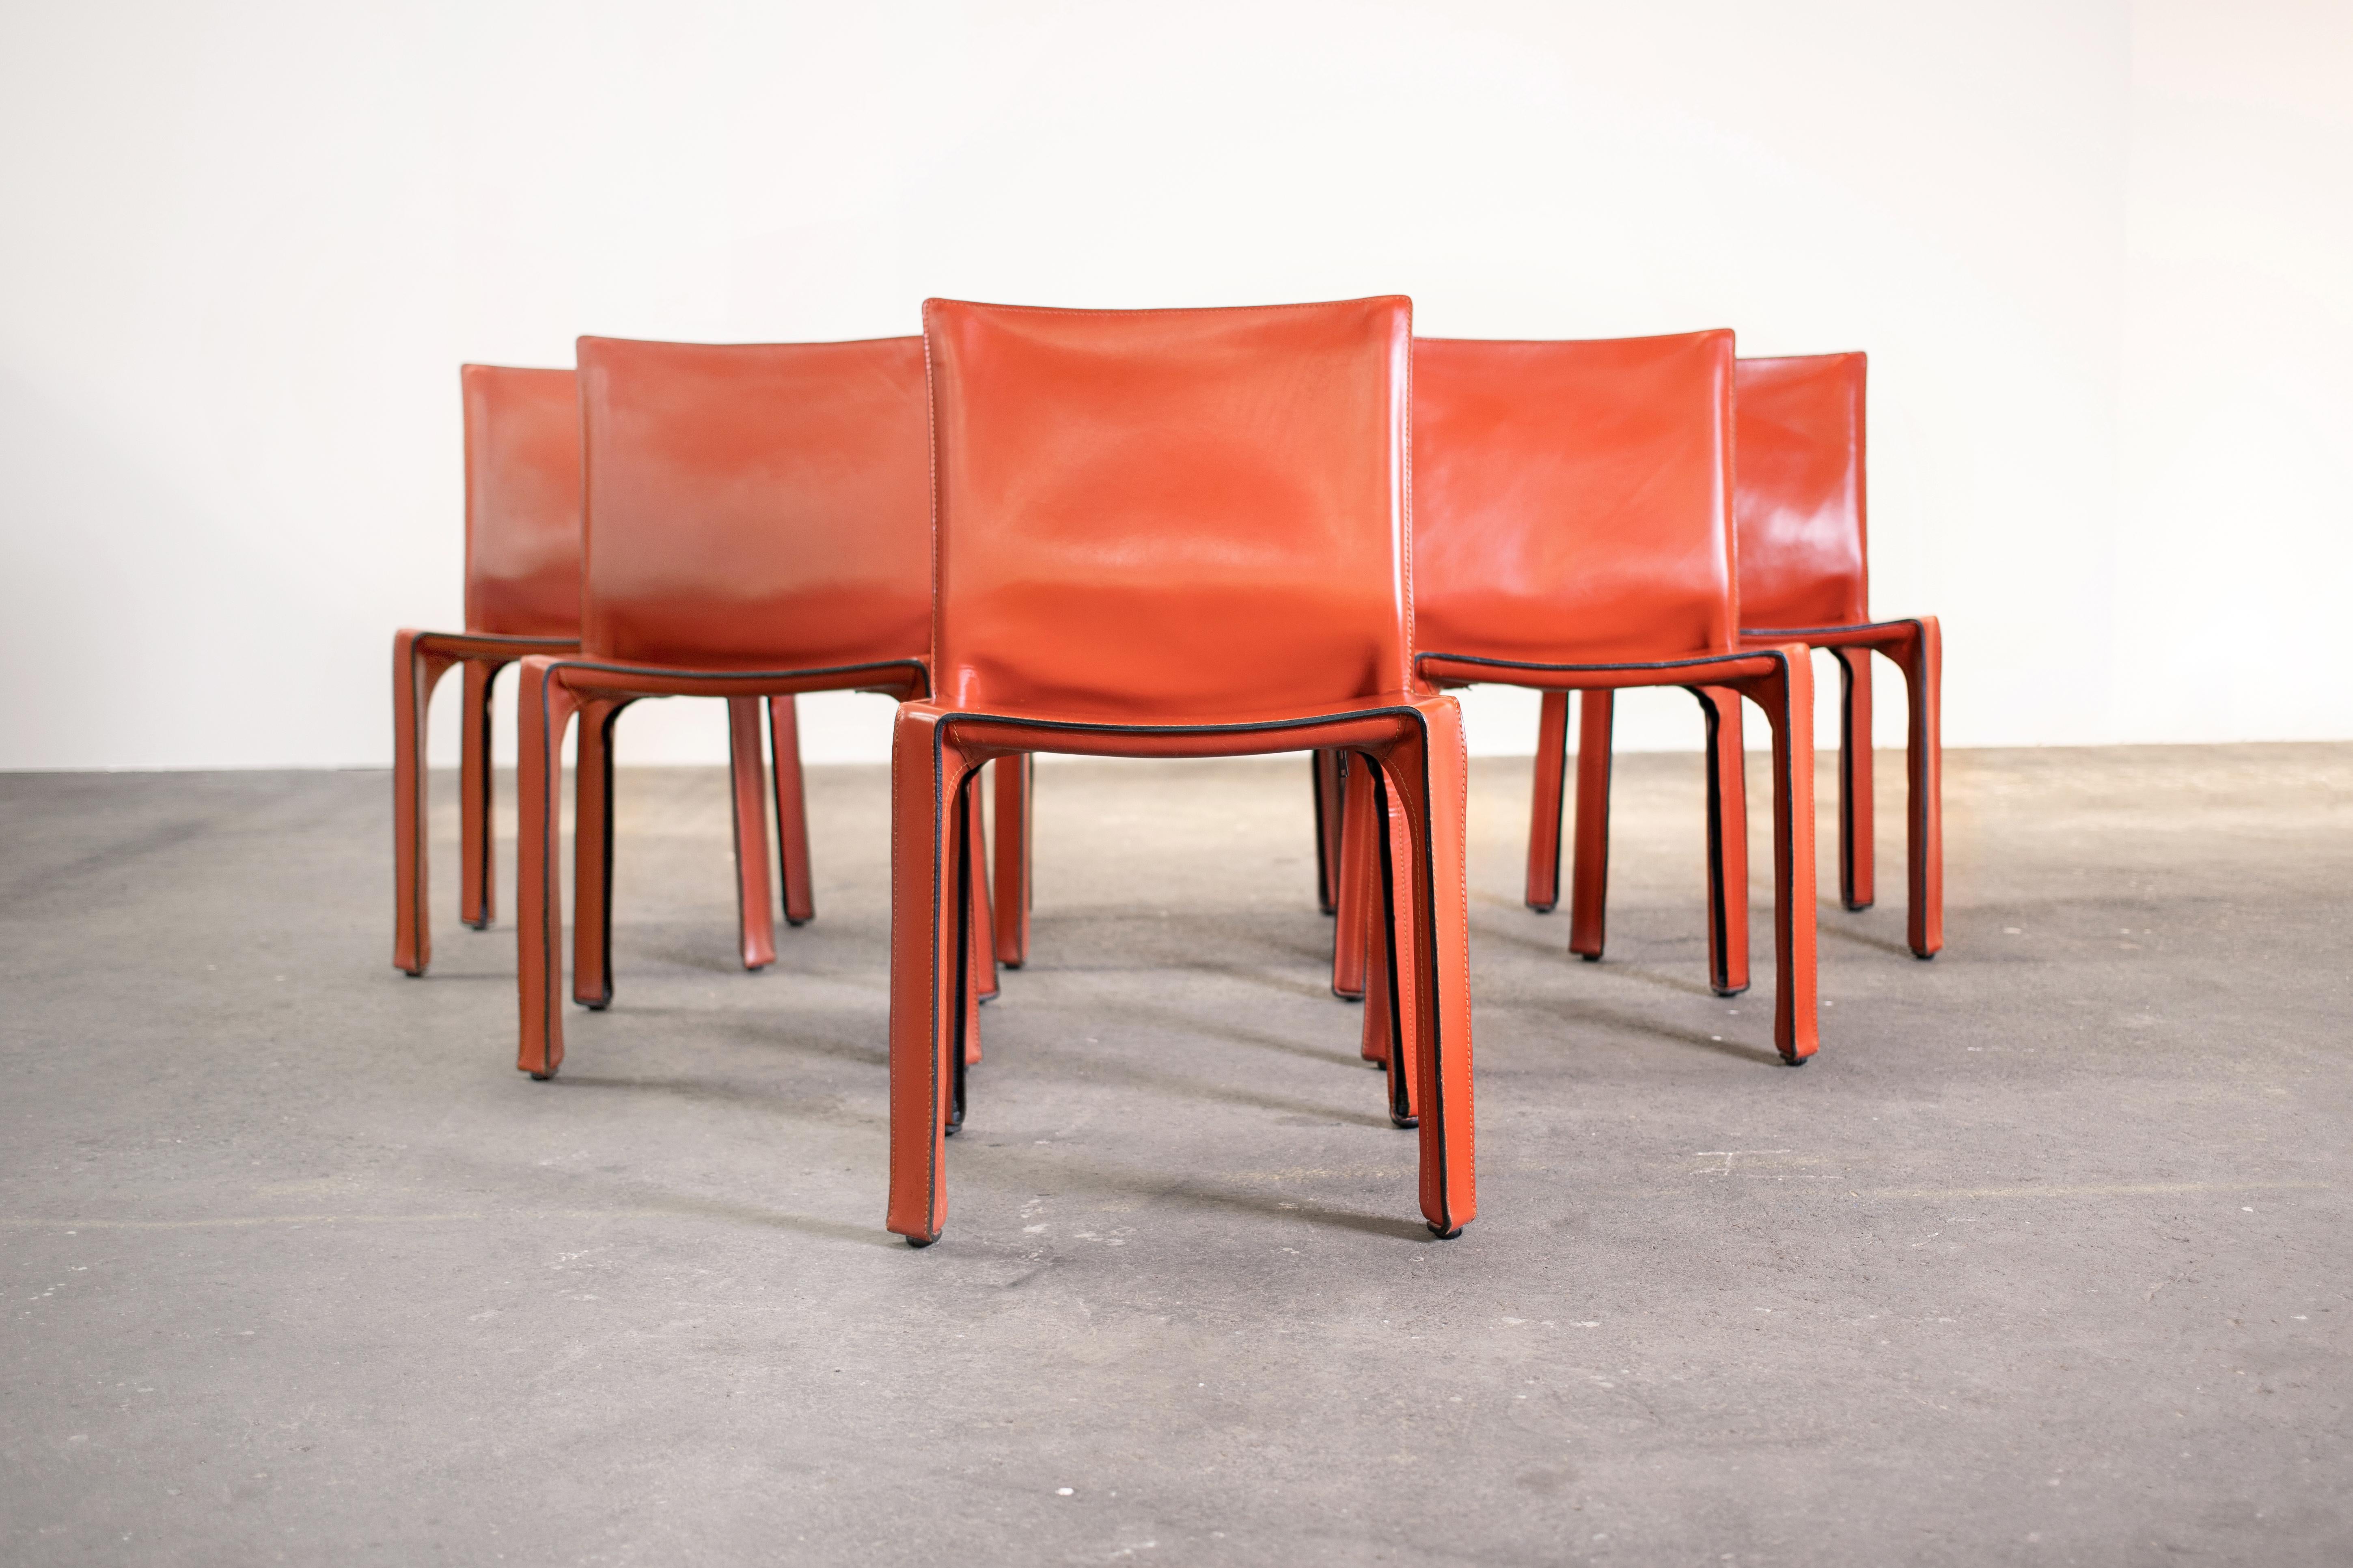 Set of 8 Mario Bellini CAB 412 chairs, made by Cassina in the 1980s. Flexible steel frame covered with a skin of high quality Russian Red (also known as Bulgarian Red) saddle leather. This elegant, versatile chair is equally suitable for the dining